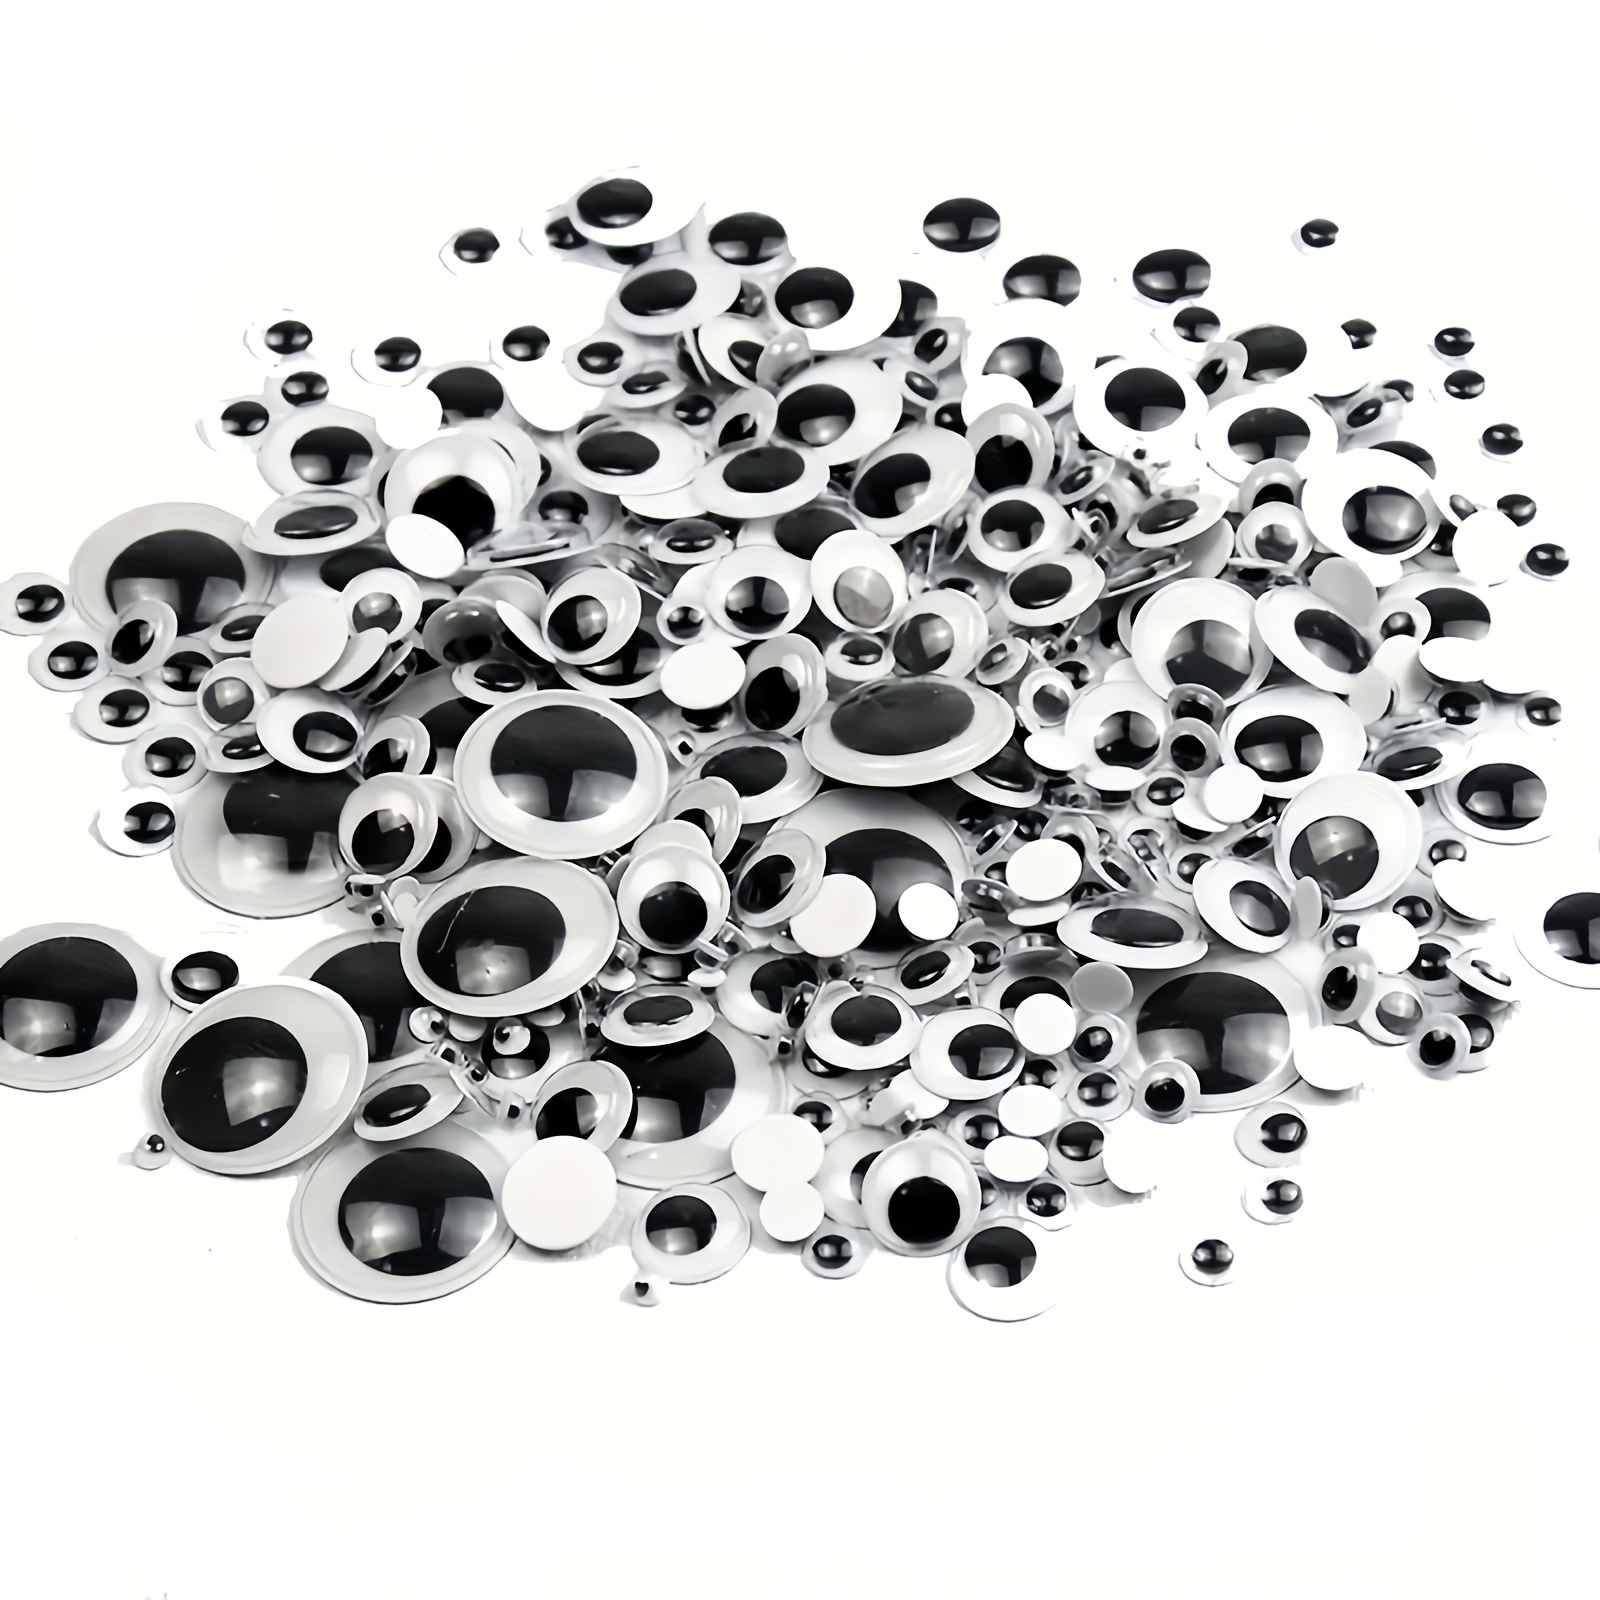 Colorations Black and White Googly Eye Stickers - 1000 Pieces